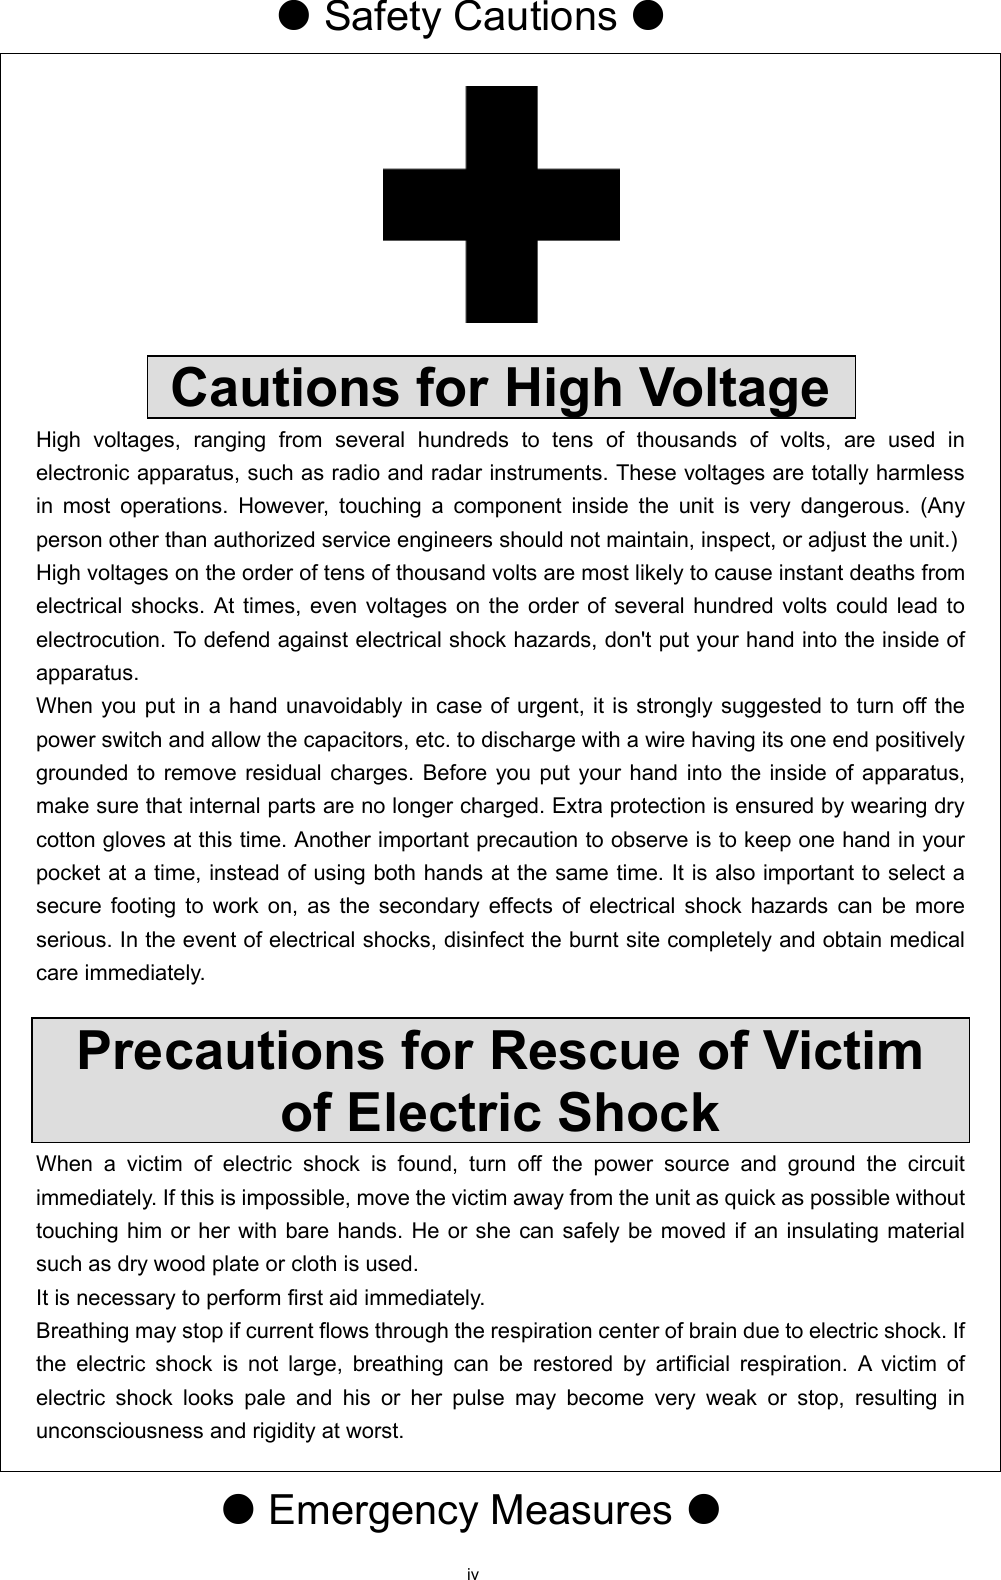 iv  Safety Cautions     Cautions for High Voltage High voltages, ranging from several hundreds to tens of thousands of volts, are used in electronic apparatus, such as radio and radar instruments. These voltages are totally harmless in most operations. However, touching a component inside the unit is very dangerous. (Any person other than authorized service engineers should not maintain, inspect, or adjust the unit.)   High voltages on the order of tens of thousand volts are most likely to cause instant deaths from electrical shocks. At times, even voltages on the order of several hundred volts could lead to electrocution. To defend against electrical shock hazards, don&apos;t put your hand into the inside of apparatus.   When you put in a hand unavoidably in case of urgent, it is strongly suggested to turn off the power switch and allow the capacitors, etc. to discharge with a wire having its one end positively grounded to remove residual charges. Before you put your hand into the inside of apparatus, make sure that internal parts are no longer charged. Extra protection is ensured by wearing dry cotton gloves at this time. Another important precaution to observe is to keep one hand in your pocket at a time, instead of using both hands at the same time. It is also important to select a secure footing to work on, as the secondary effects of electrical shock hazards can be more serious. In the event of electrical shocks, disinfect the burnt site completely and obtain medical care immediately.    Precautions for Rescue of Victim of Electric Shock When a victim of electric shock is found, turn off the power source and ground the circuit immediately. If this is impossible, move the victim away from the unit as quick as possible without touching him or her with bare hands. He or she can safely be moved if an insulating material such as dry wood plate or cloth is used.   It is necessary to perform first aid immediately. Breathing may stop if current flows through the respiration center of brain due to electric shock. If the electric shock is not large, breathing can be restored by artificial respiration. A victim of electric shock looks pale and his or her pulse may become very weak or stop, resulting in unconsciousness and rigidity at worst.    Emergency Measures  